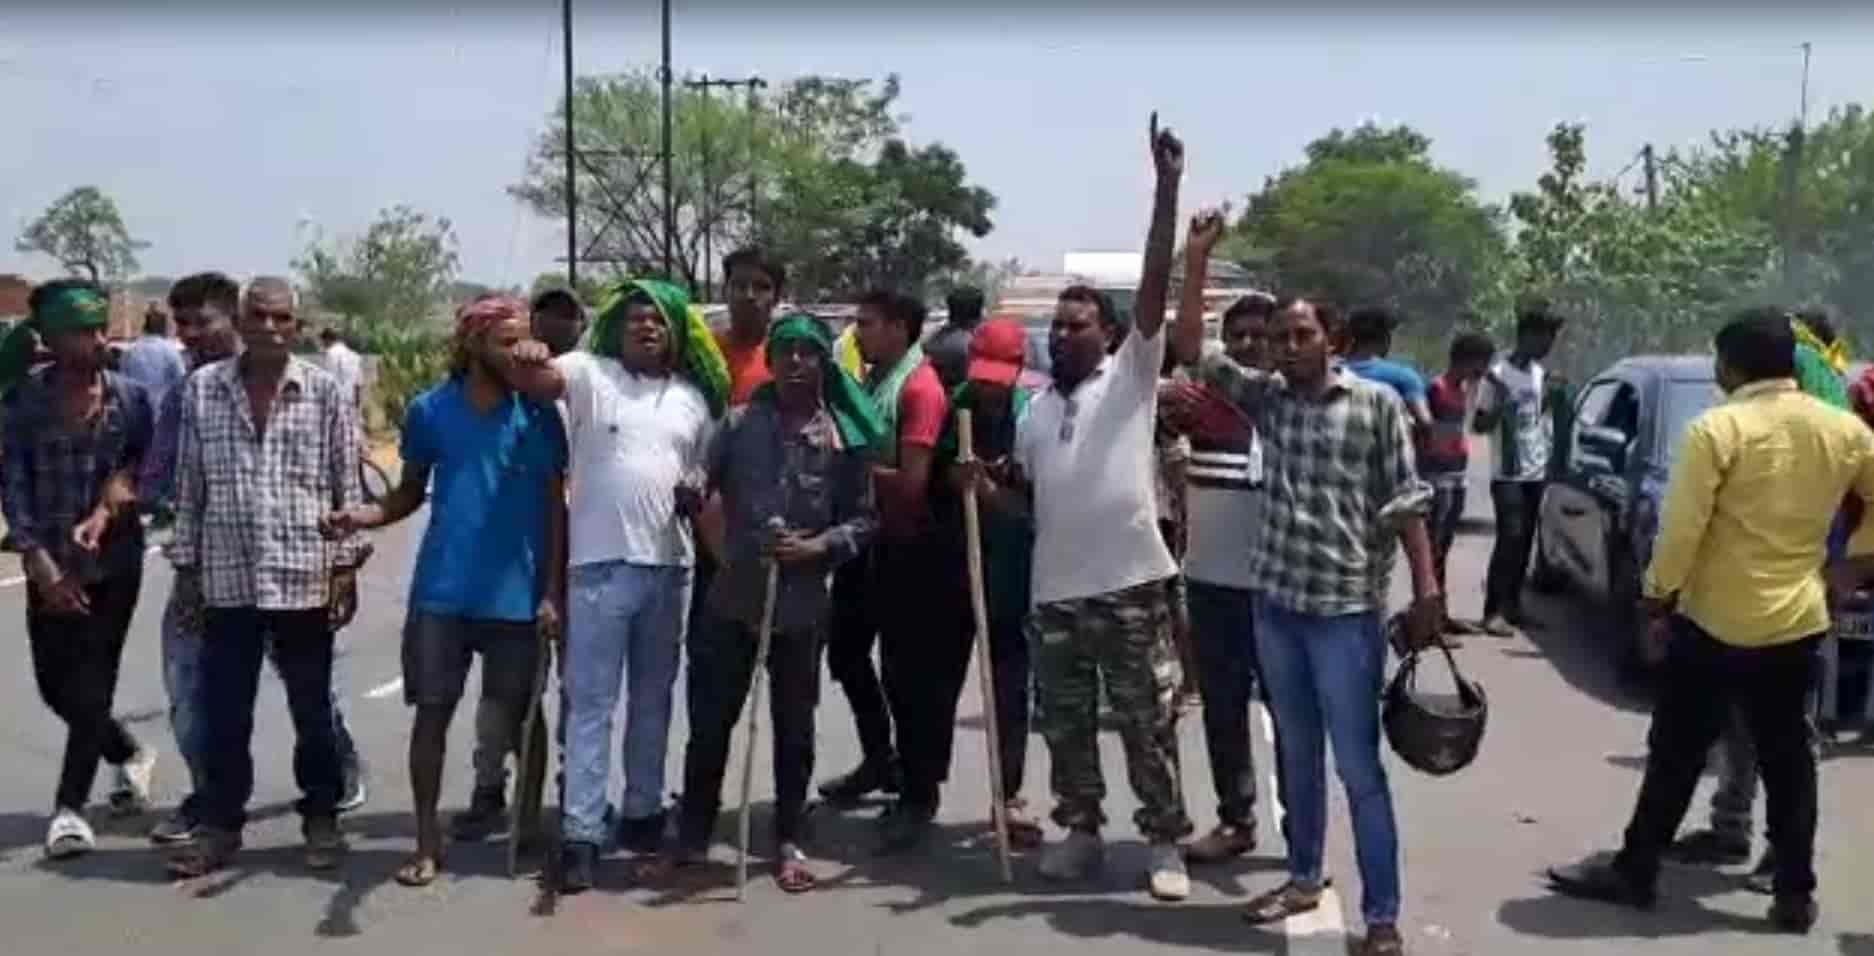 Protestors in Jharkhand initiate a 48-hour bandh opposing the 60:40 Employment policy, leading to mixed reactions across rural and urban areas.